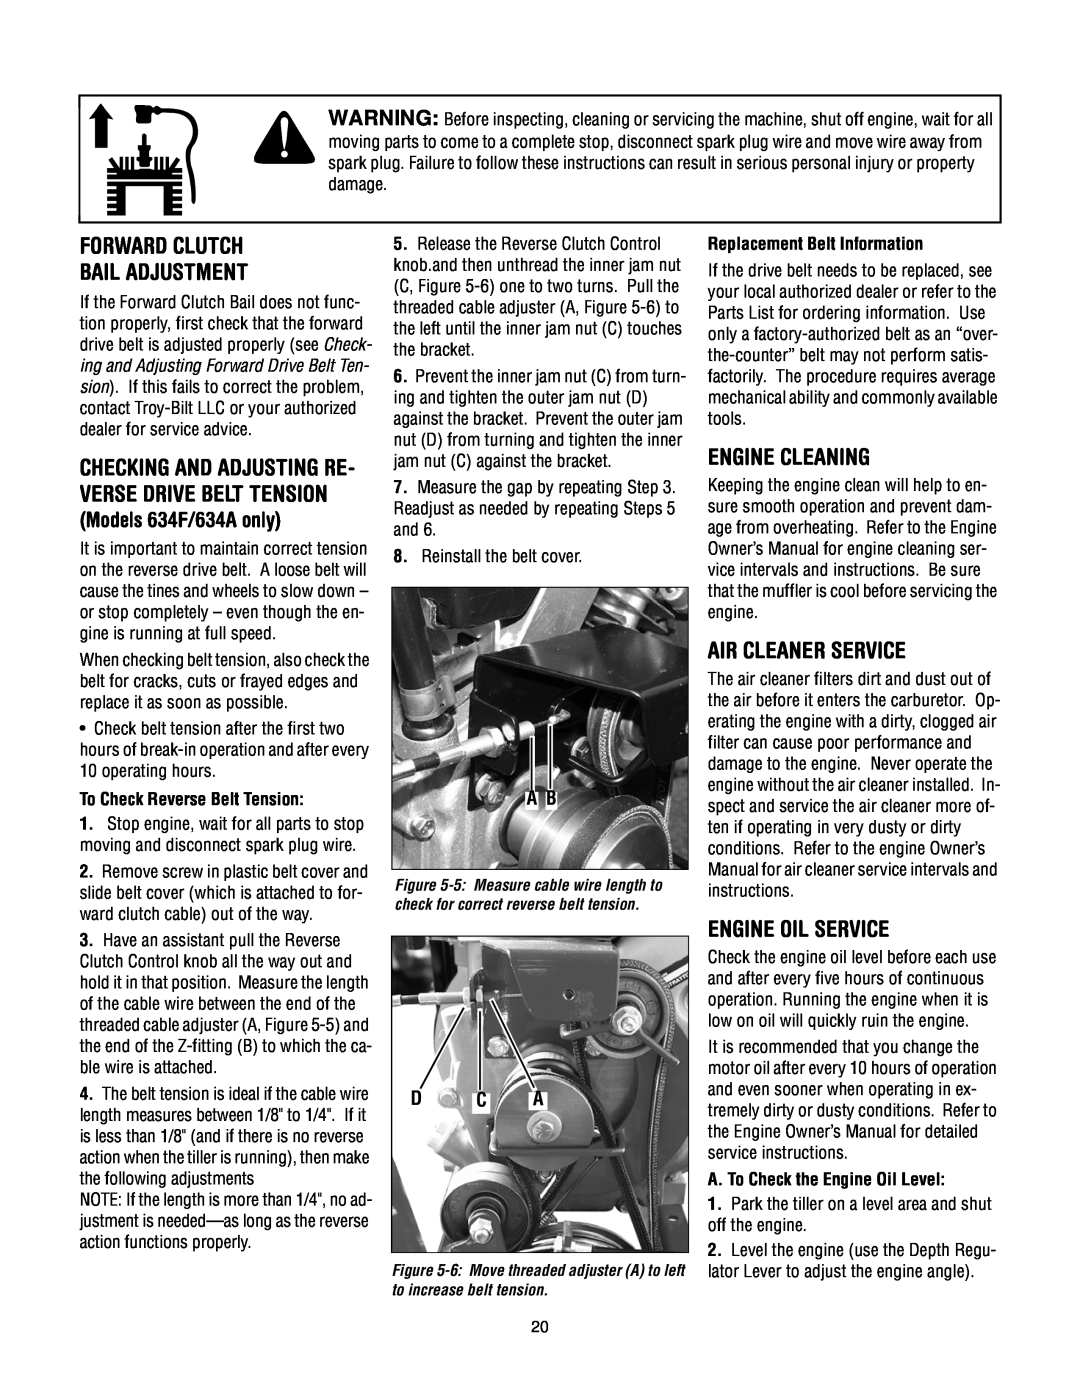 Troy-Bilt 630C-Tuffy manual Forward Clutch Bail Adjustment, Engine Cleaning, Air Cleaner Service, Engine Oil Service, D C A 